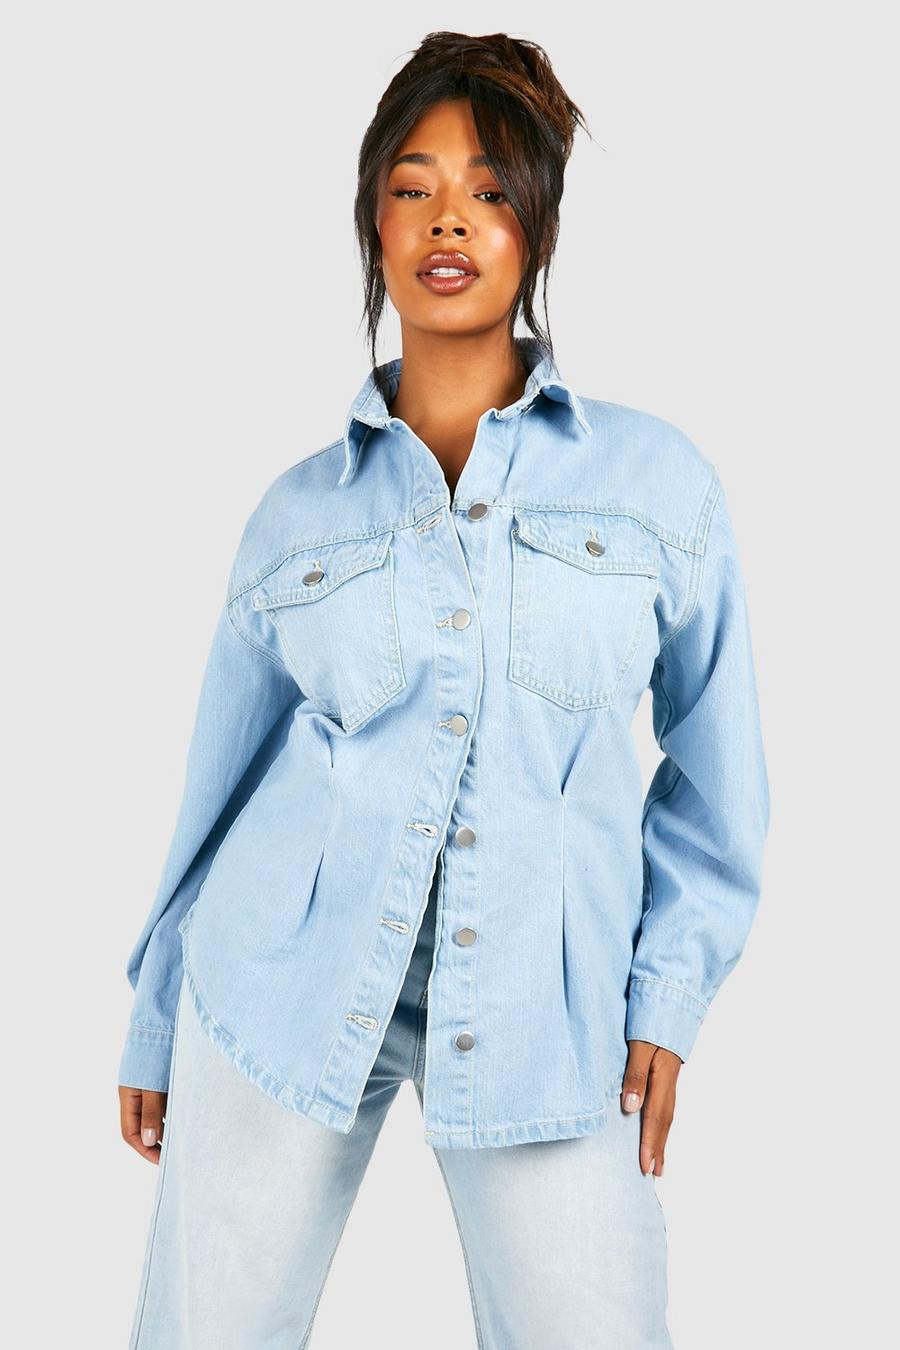 Women s Clothes Sales,Plus Size Tunics,Clearance Deals Under 10return  pallets,Fashion Outfits,Teen Summer Tops,Womens Plus Size Shirts,Warehouse  at  Women's Clothing store